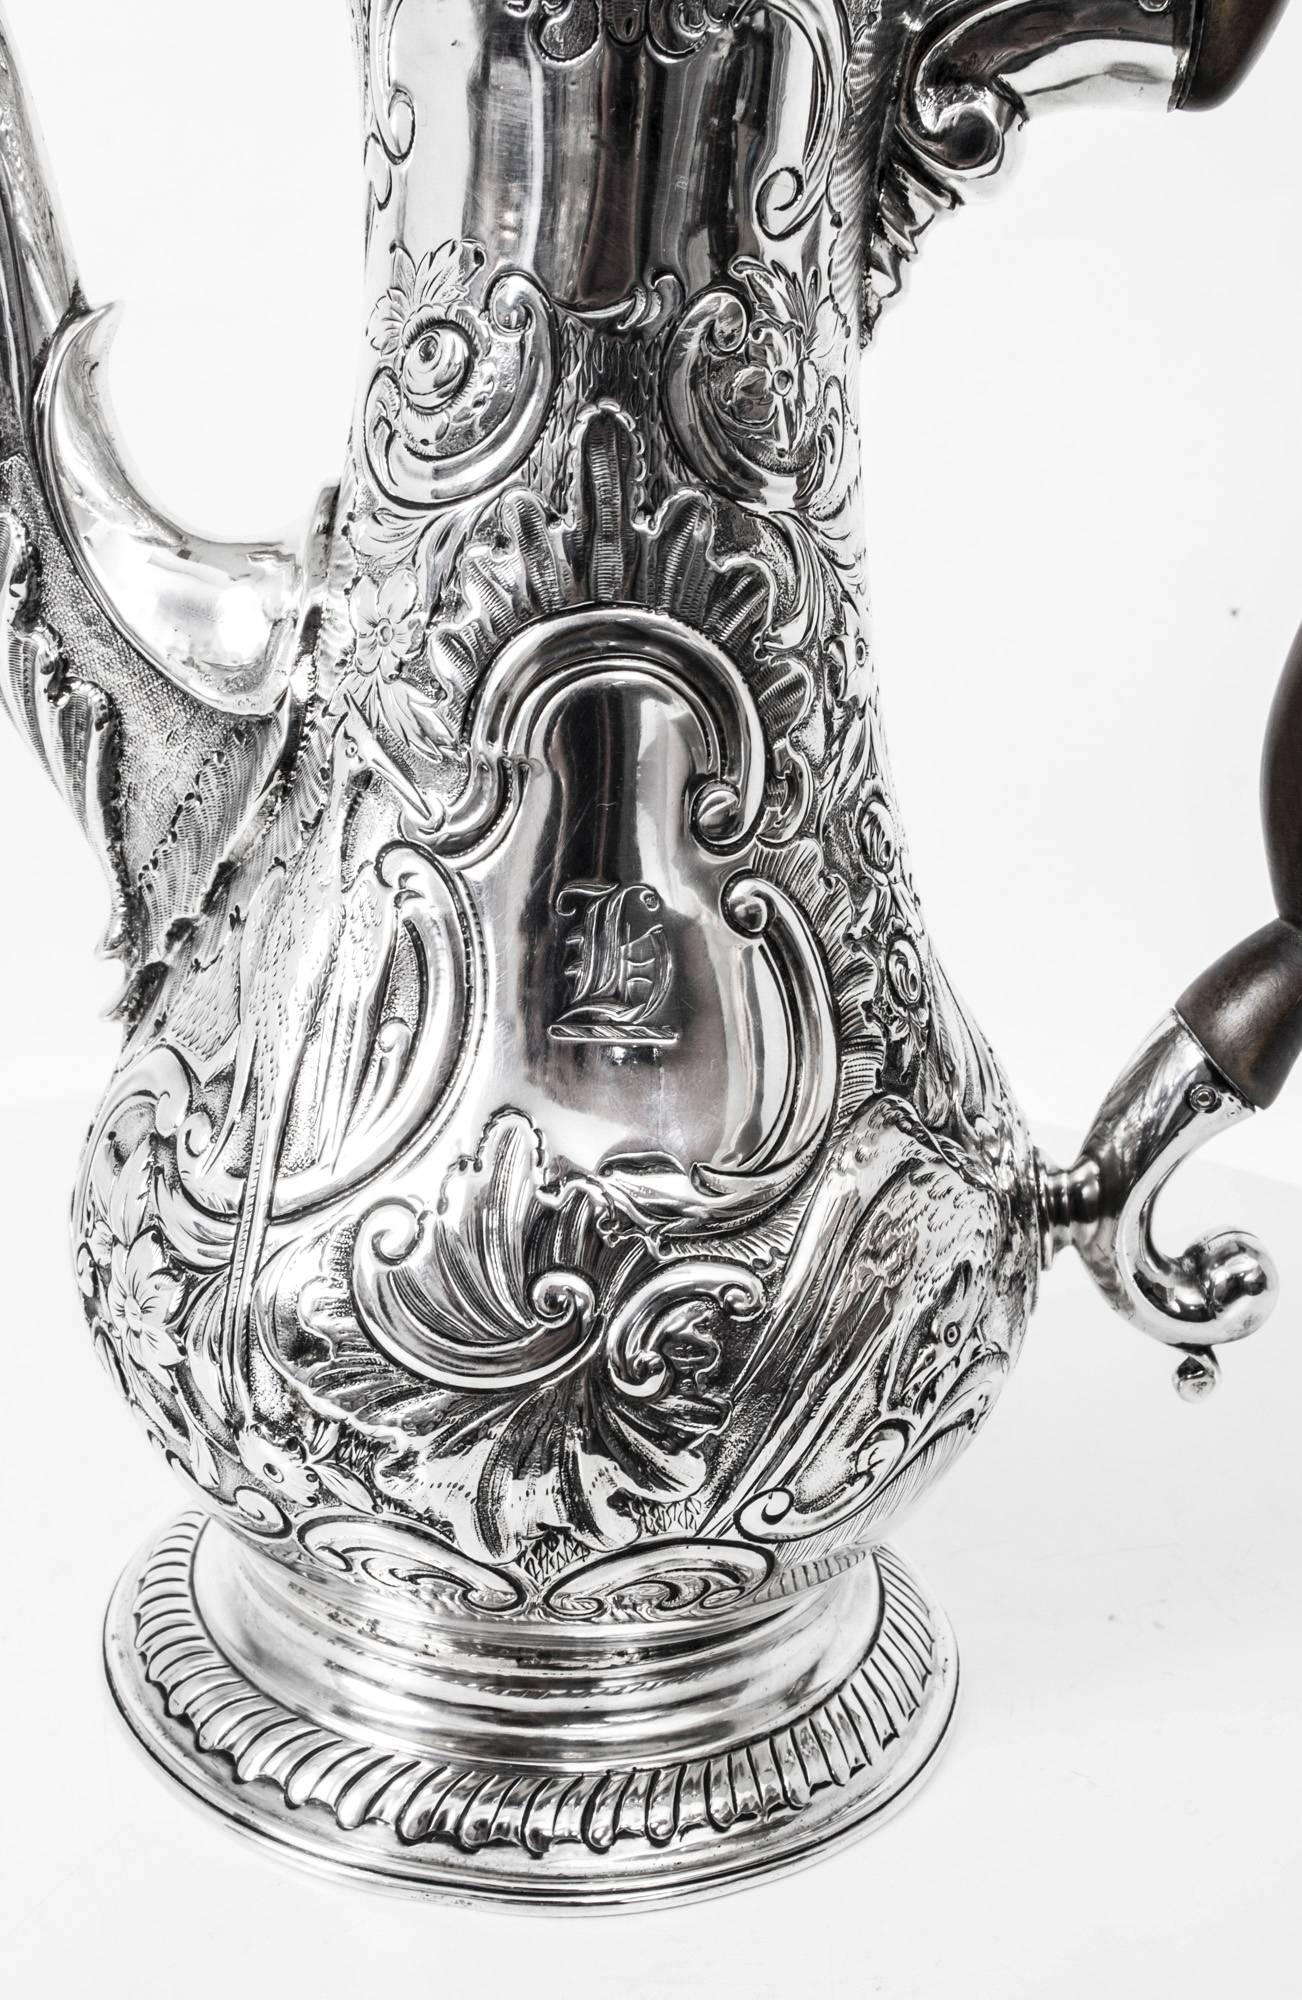 This is a wonderful antique English George III sterling silver coffee pot with hallmarks for London 1767 and the makers mark of W & J Priest, the renowned London silversmiths William Priest & James Priest.

This coffee pot is of very elegant